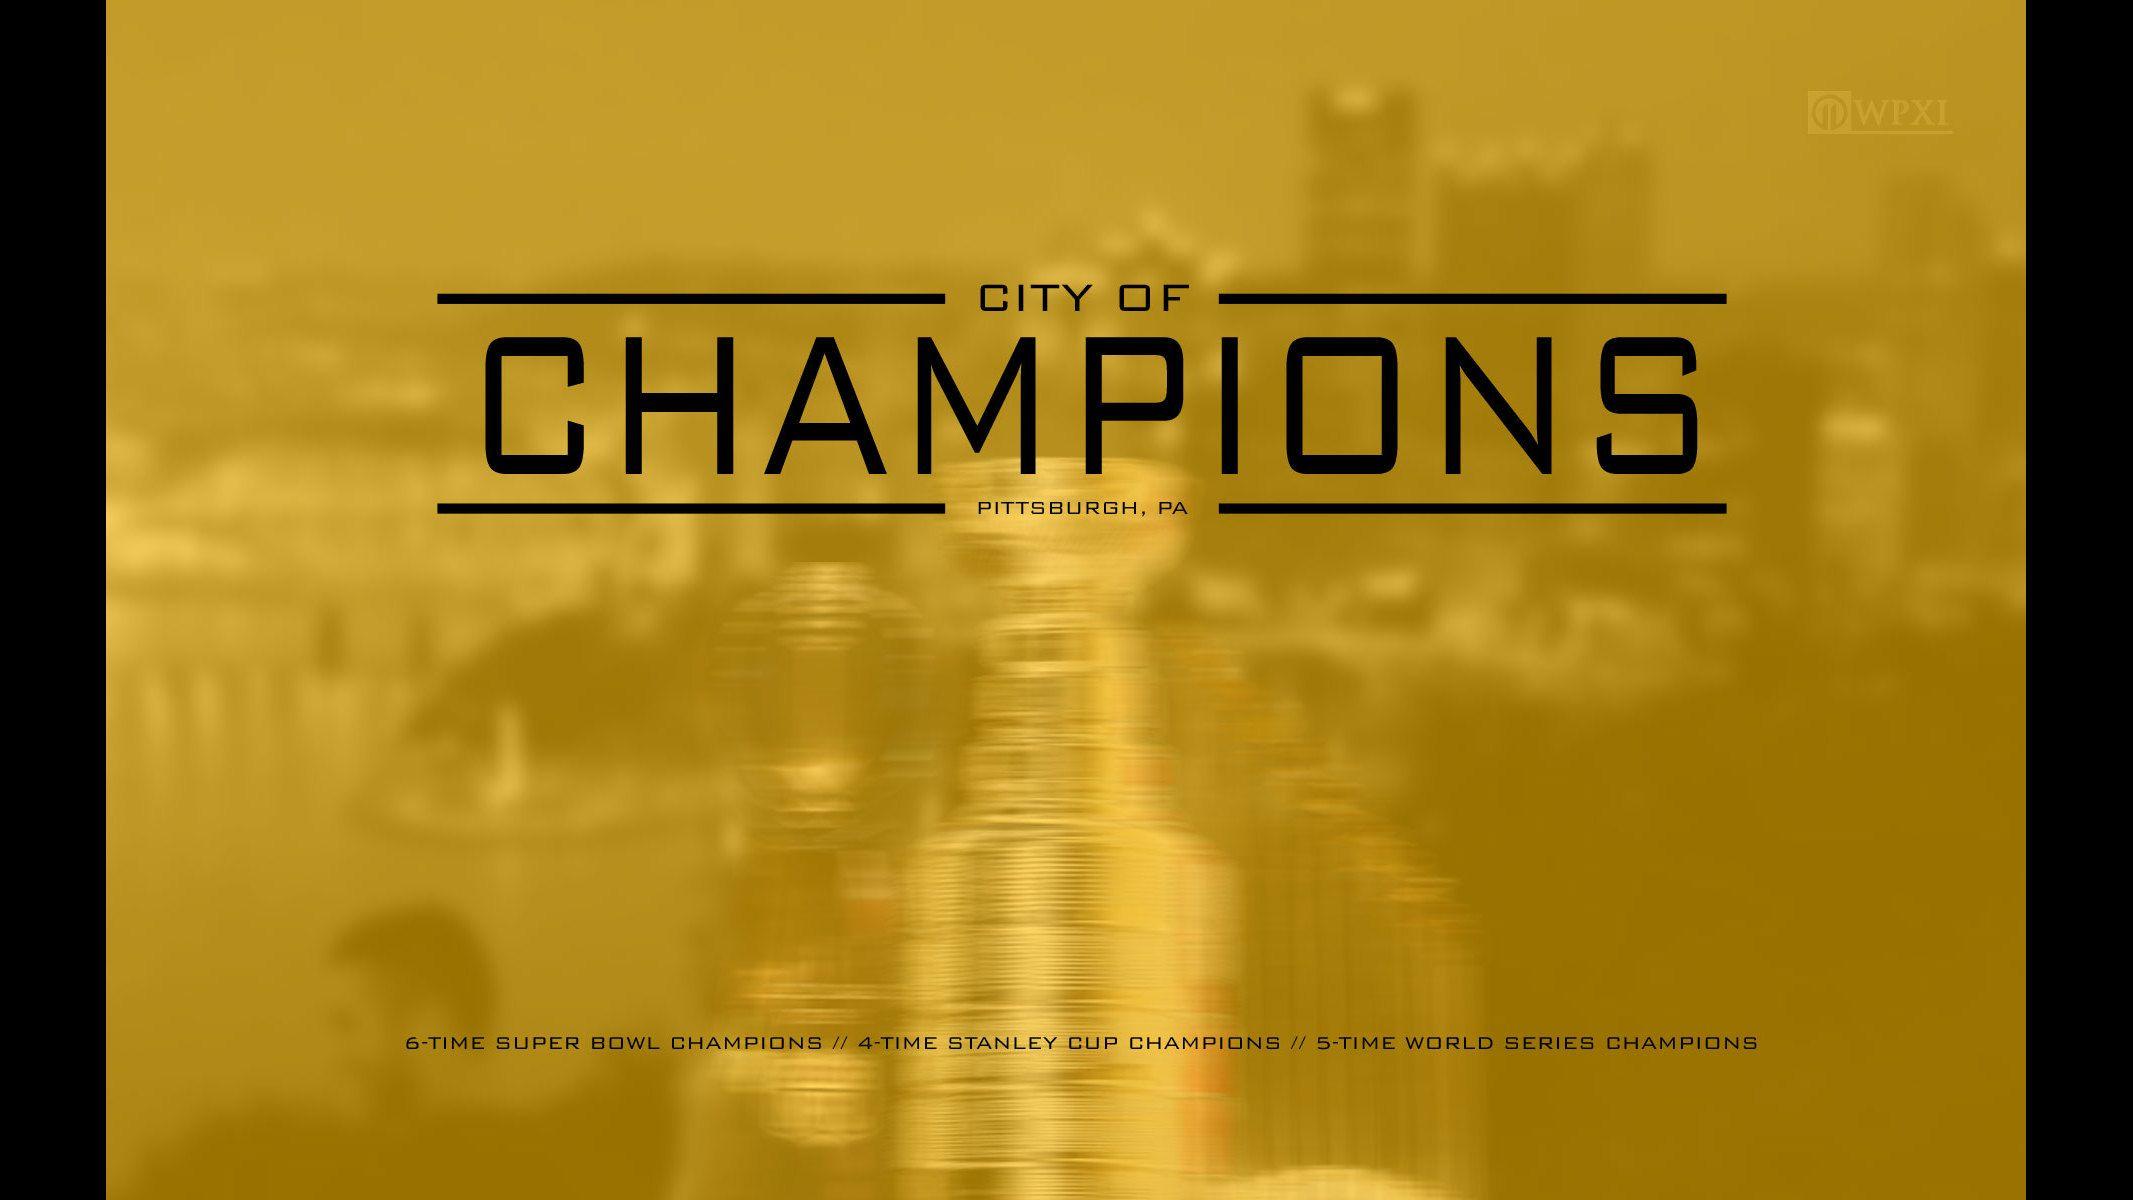 Show your Pittsburgh pride with CITY OF CHAMPIONS wallpaper!